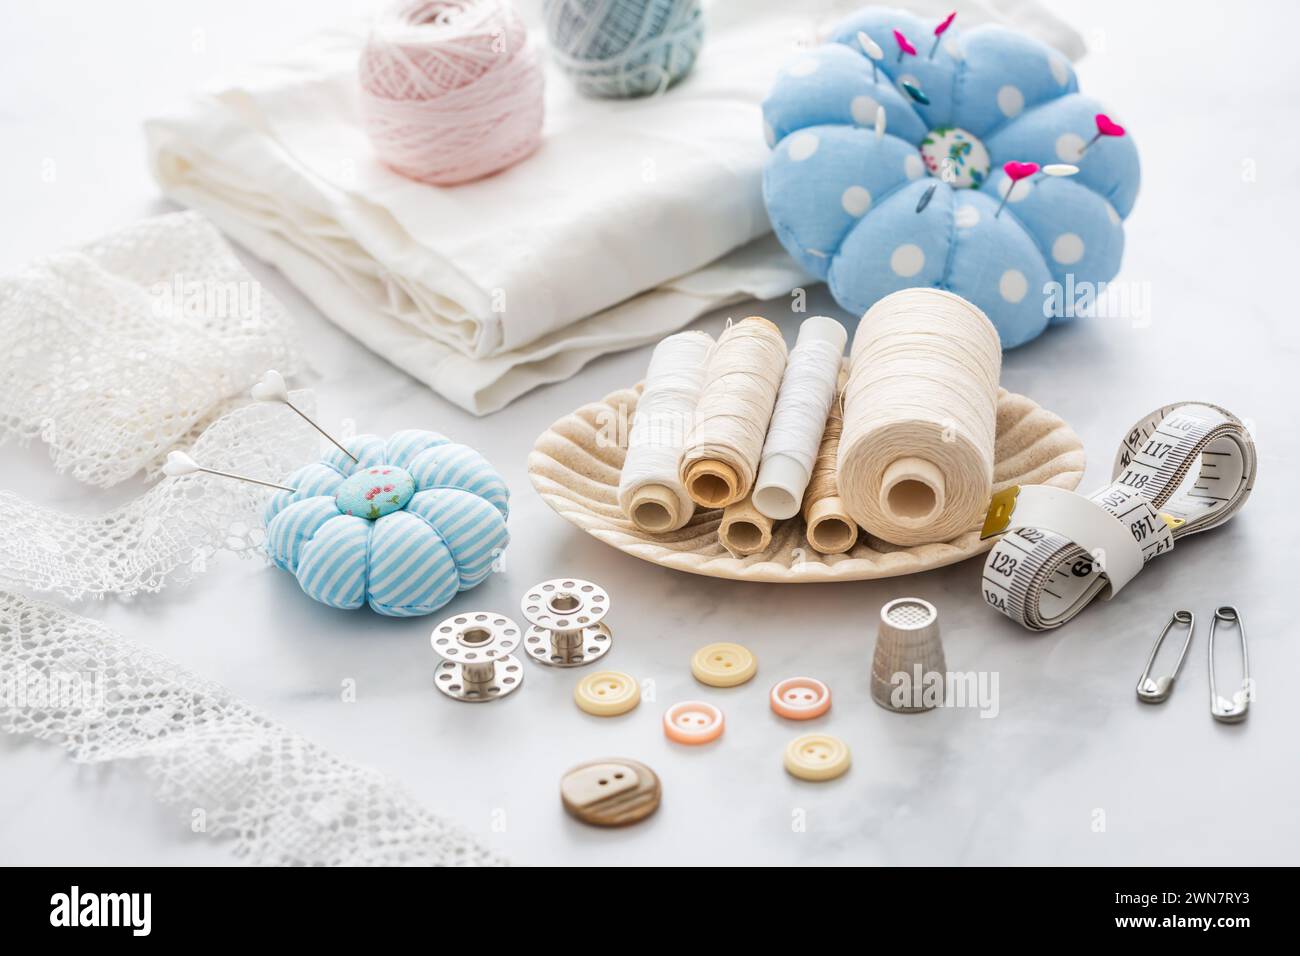 Still life of sewing utensils with buttons, threads, pins Stock Photo